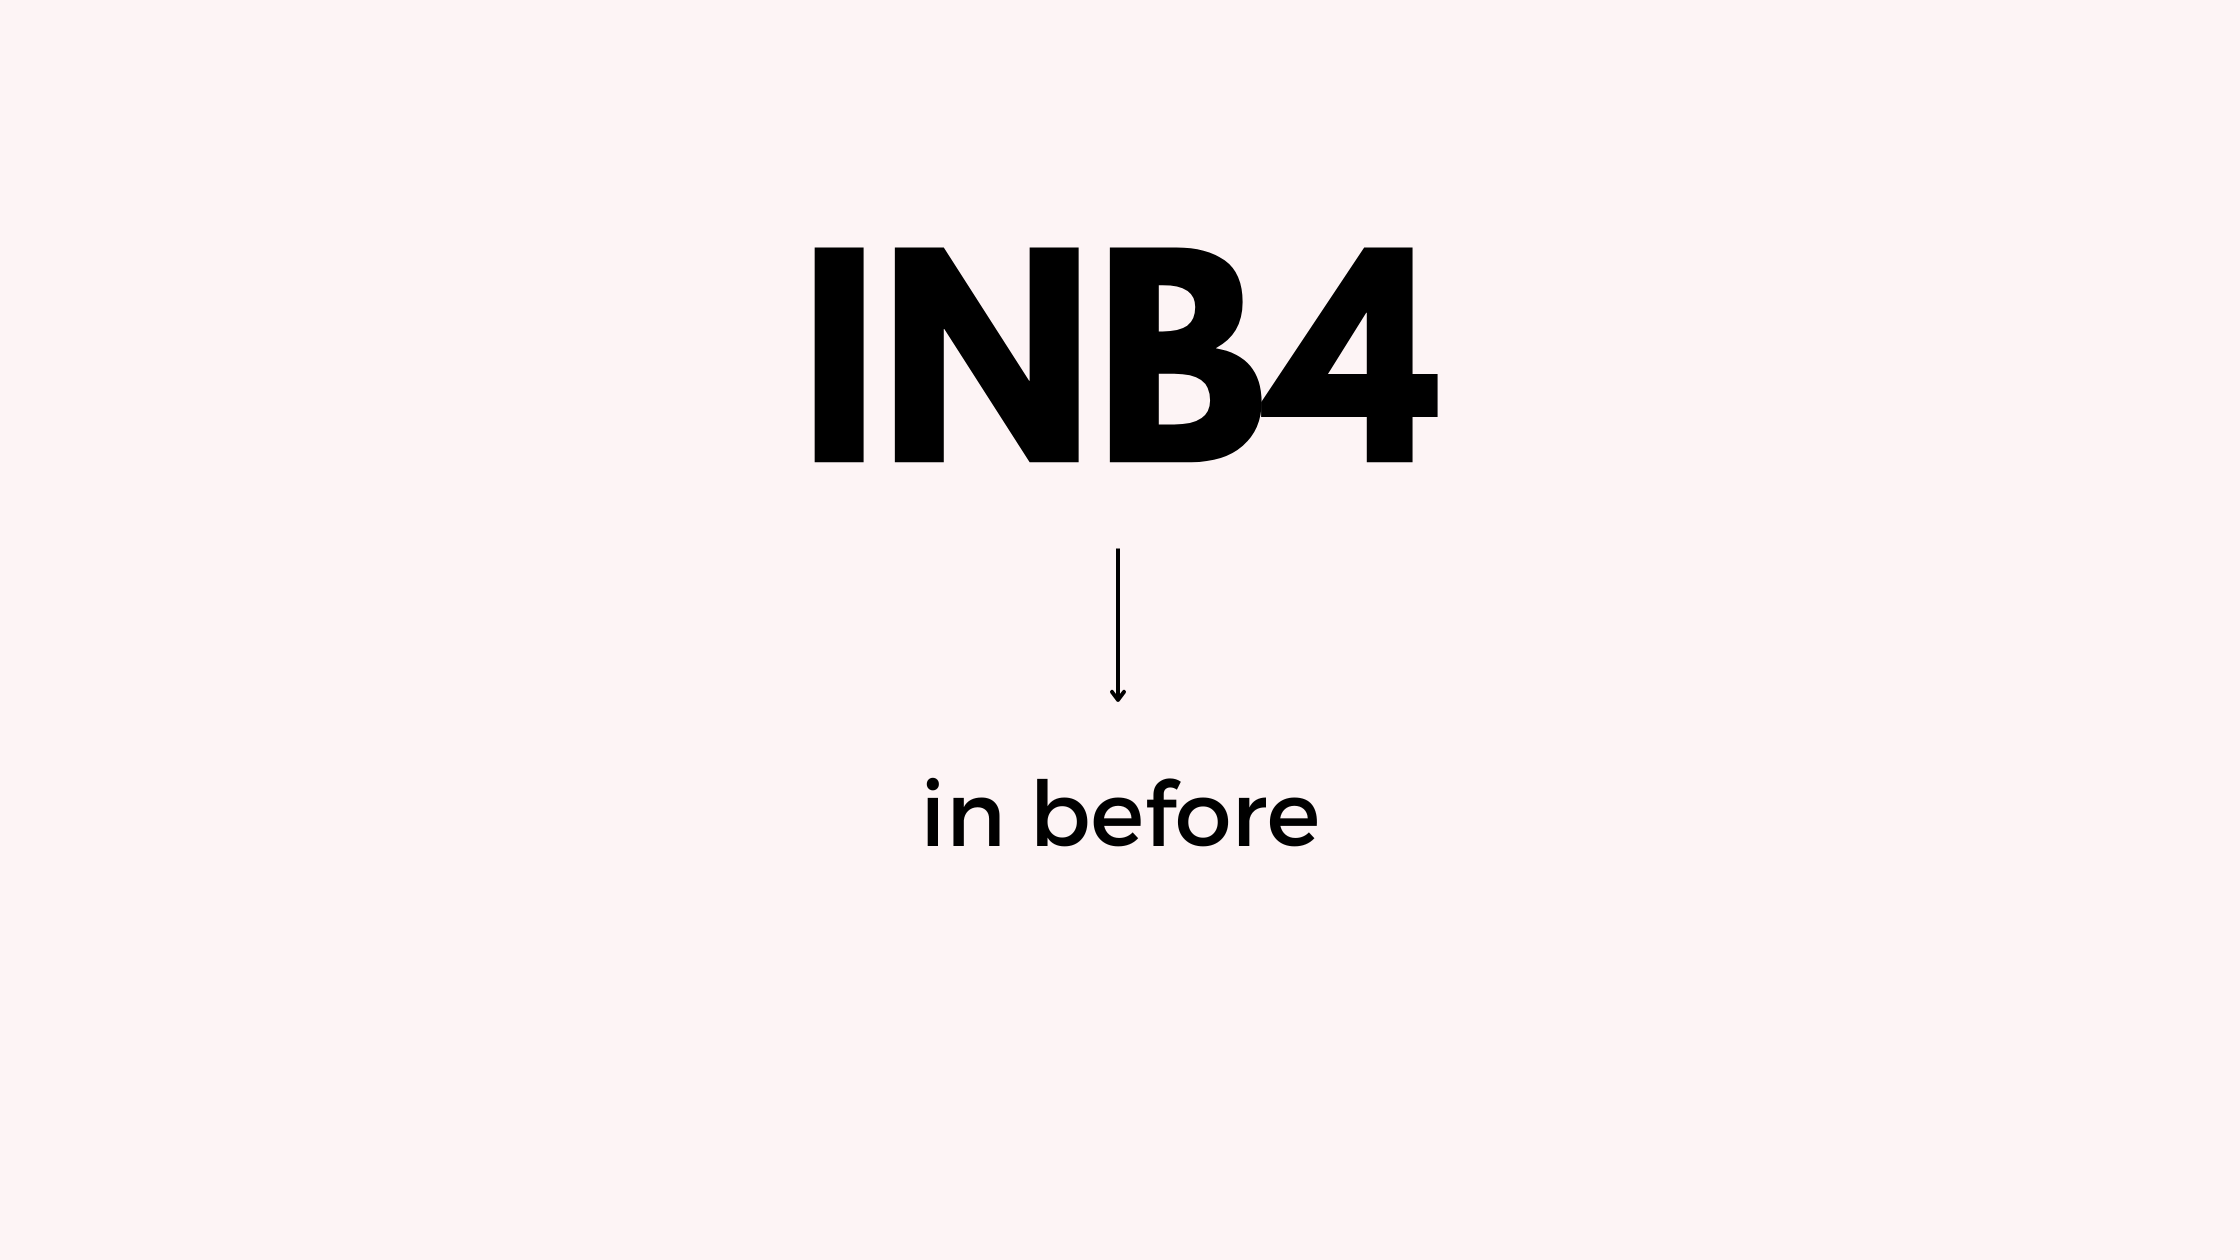 What does Inb4 mean?